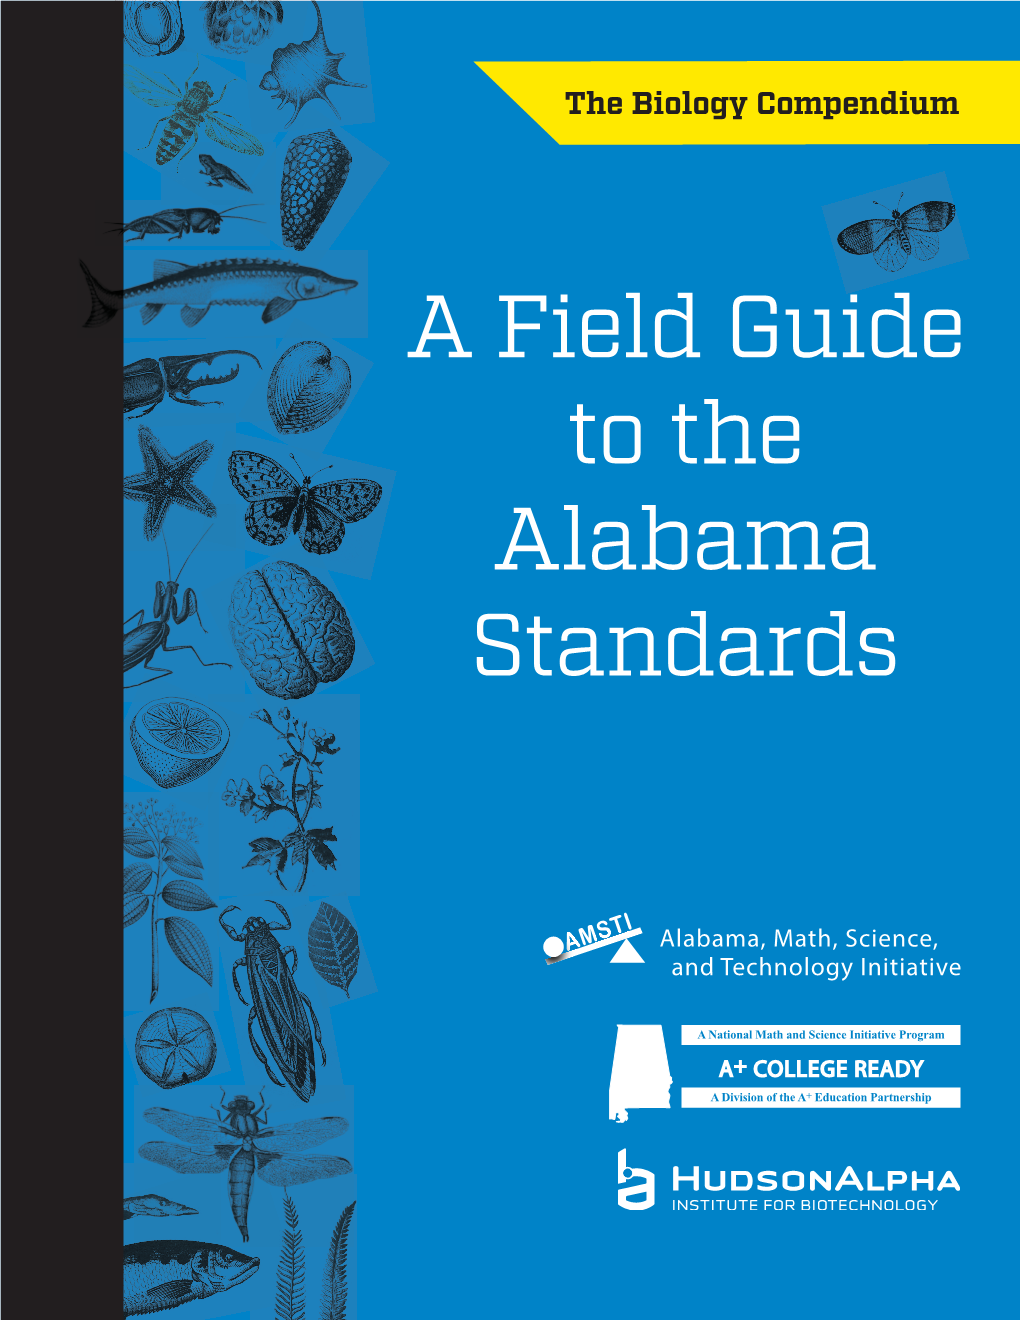 The Biology Compendium the Biology Compendium: a Field Guide to the Alabama Standards